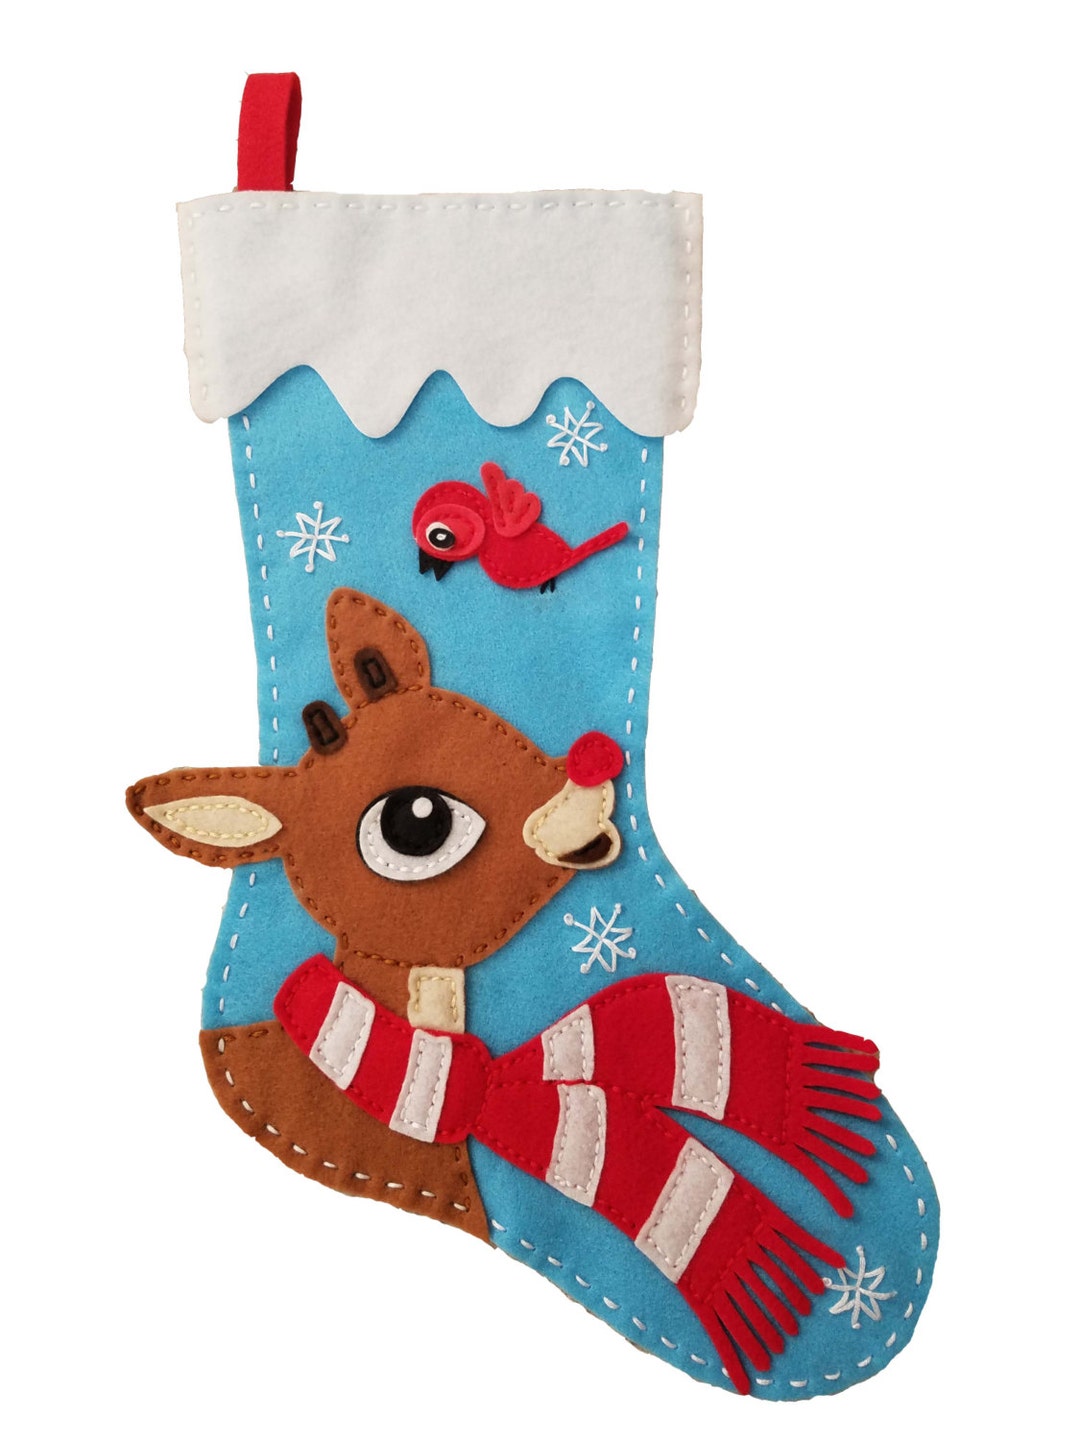 Rudolph the Red-nosed Reindeer Felt Stocking - Etsy